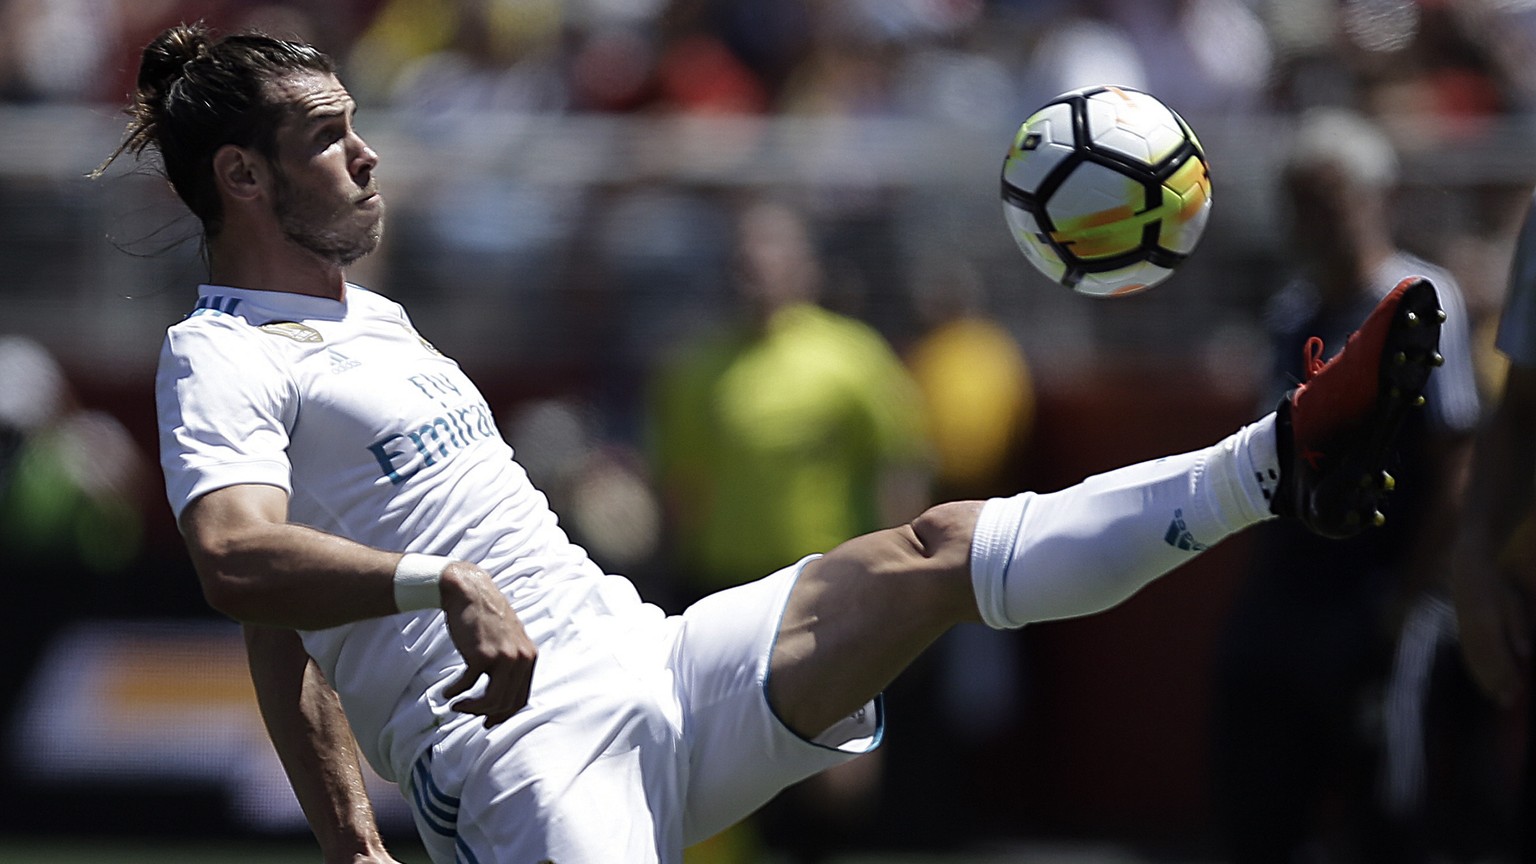 Real Madrid&#039;s Gareth Bale kicks the ball during the first half of an international friendly soccer match against Manchester United, Sunday, July 23, 2017, in Santa Clara, Calif. (AP Photo/Ben Mar ...